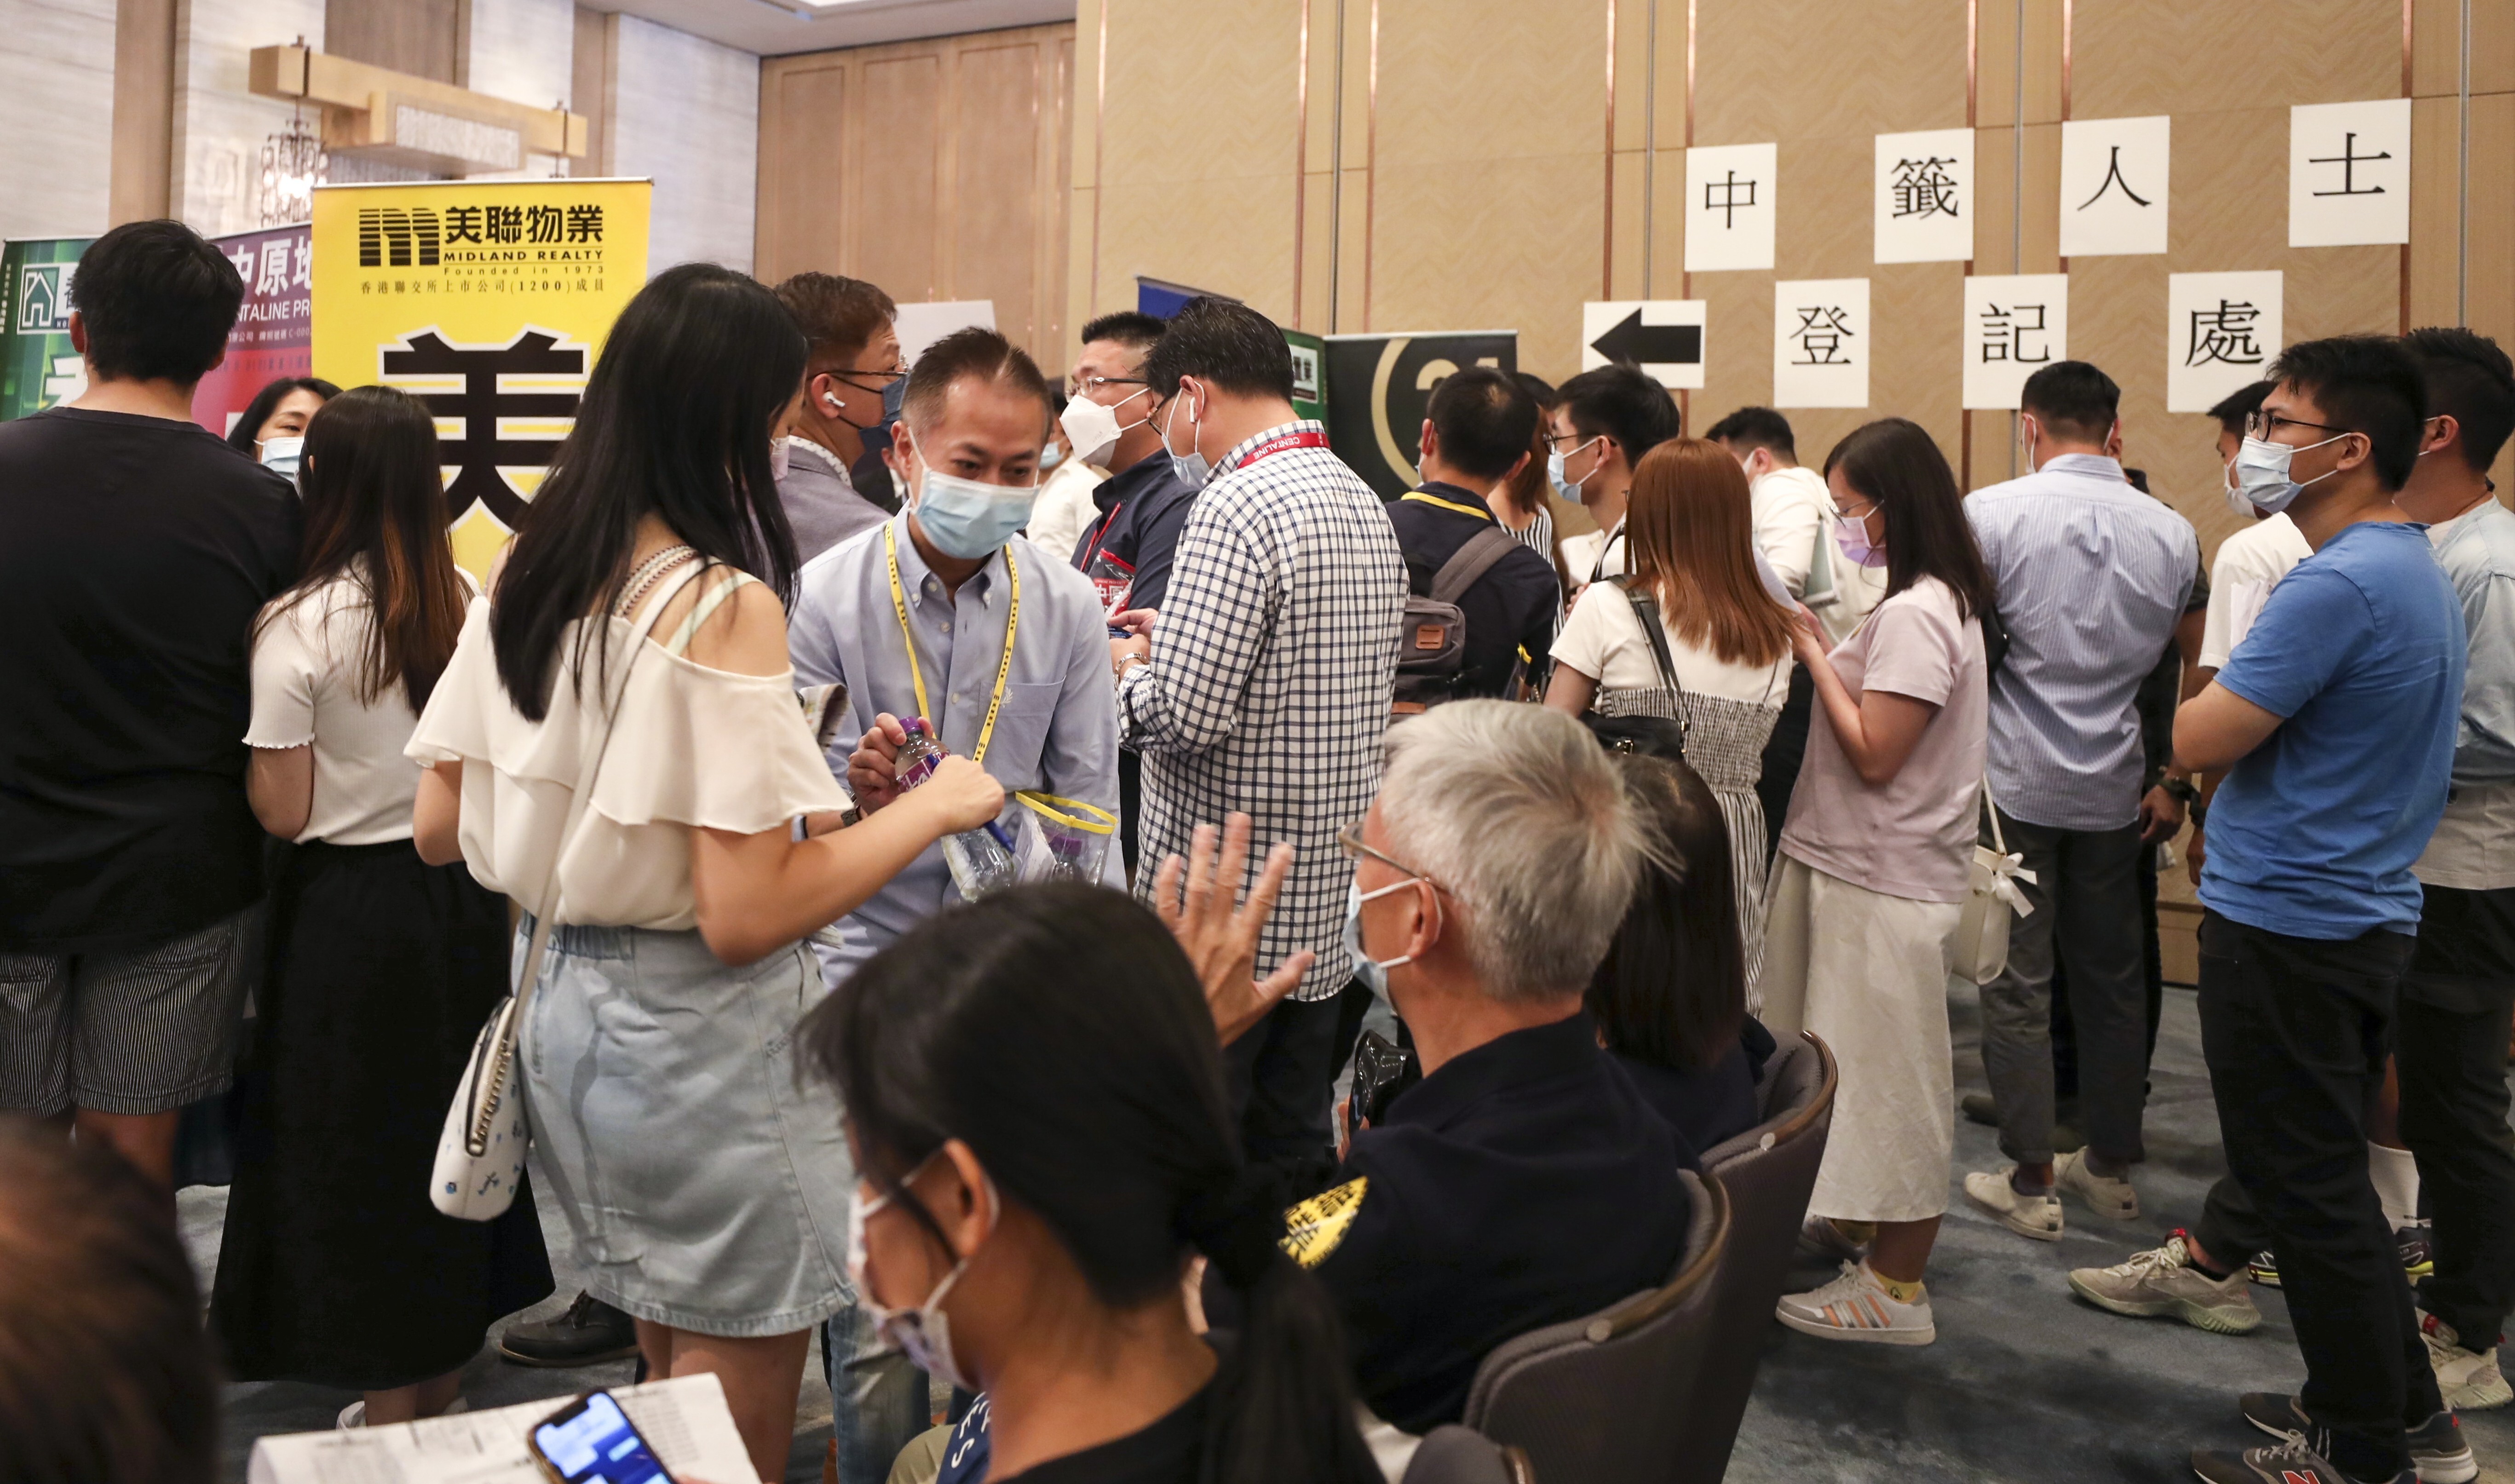 Home buyers piled in to snap up Kwai Hung Group’s Mangrove flats in Hung Hom at the developer’s sales office at the Kerry Hotel on 18 September 2021. Photo: Xiaomei Chen